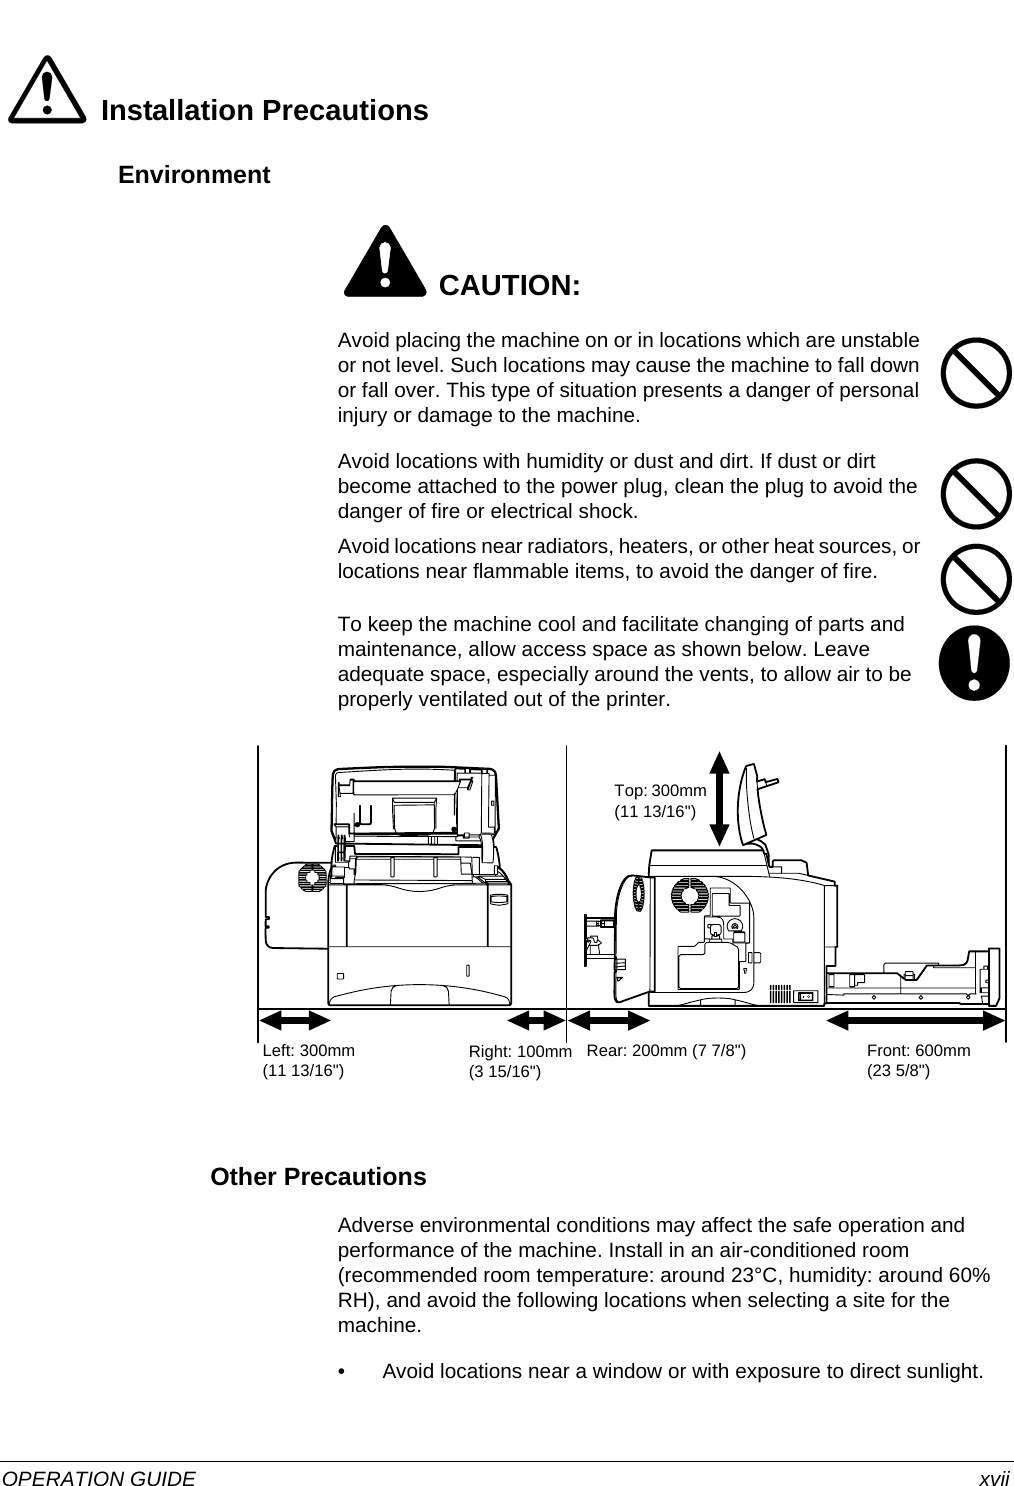  OPERATION GUIDE xviiInstallation PrecautionsEnvironment CAUTION:Avoid placing the machine on or in locations which are unstable or not level. Such locations may cause the machine to fall down or fall over. This type of situation presents a danger of personal injury or damage to the machine. Avoid locations with humidity or dust and dirt. If dust or dirt become attached to the power plug, clean the plug to avoid the danger of fire or electrical shock.Avoid locations near radiators, heaters, or other heat sources, or locations near flammable items, to avoid the danger of fire.To keep the machine cool and facilitate changing of parts and maintenance, allow access space as shown below. Leave adequate space, especially around the vents, to allow air to be properly ventilated out of the printer.Other PrecautionsAdverse environmental conditions may affect the safe operation and performance of the machine. Install in an air-conditioned room (recommended room temperature: around 23°C, humidity: around 60% RH), and avoid the following locations when selecting a site for the machine.• Avoid locations near a window or with exposure to direct sunlight. Left: 300mm (11 13/16&quot;) Right: 100mm (3 15/16&quot;)Rear: 200mm (7 7/8&quot;) Front: 600mm (23 5/8&quot;)Top: 300mm (11 13/16&quot;)